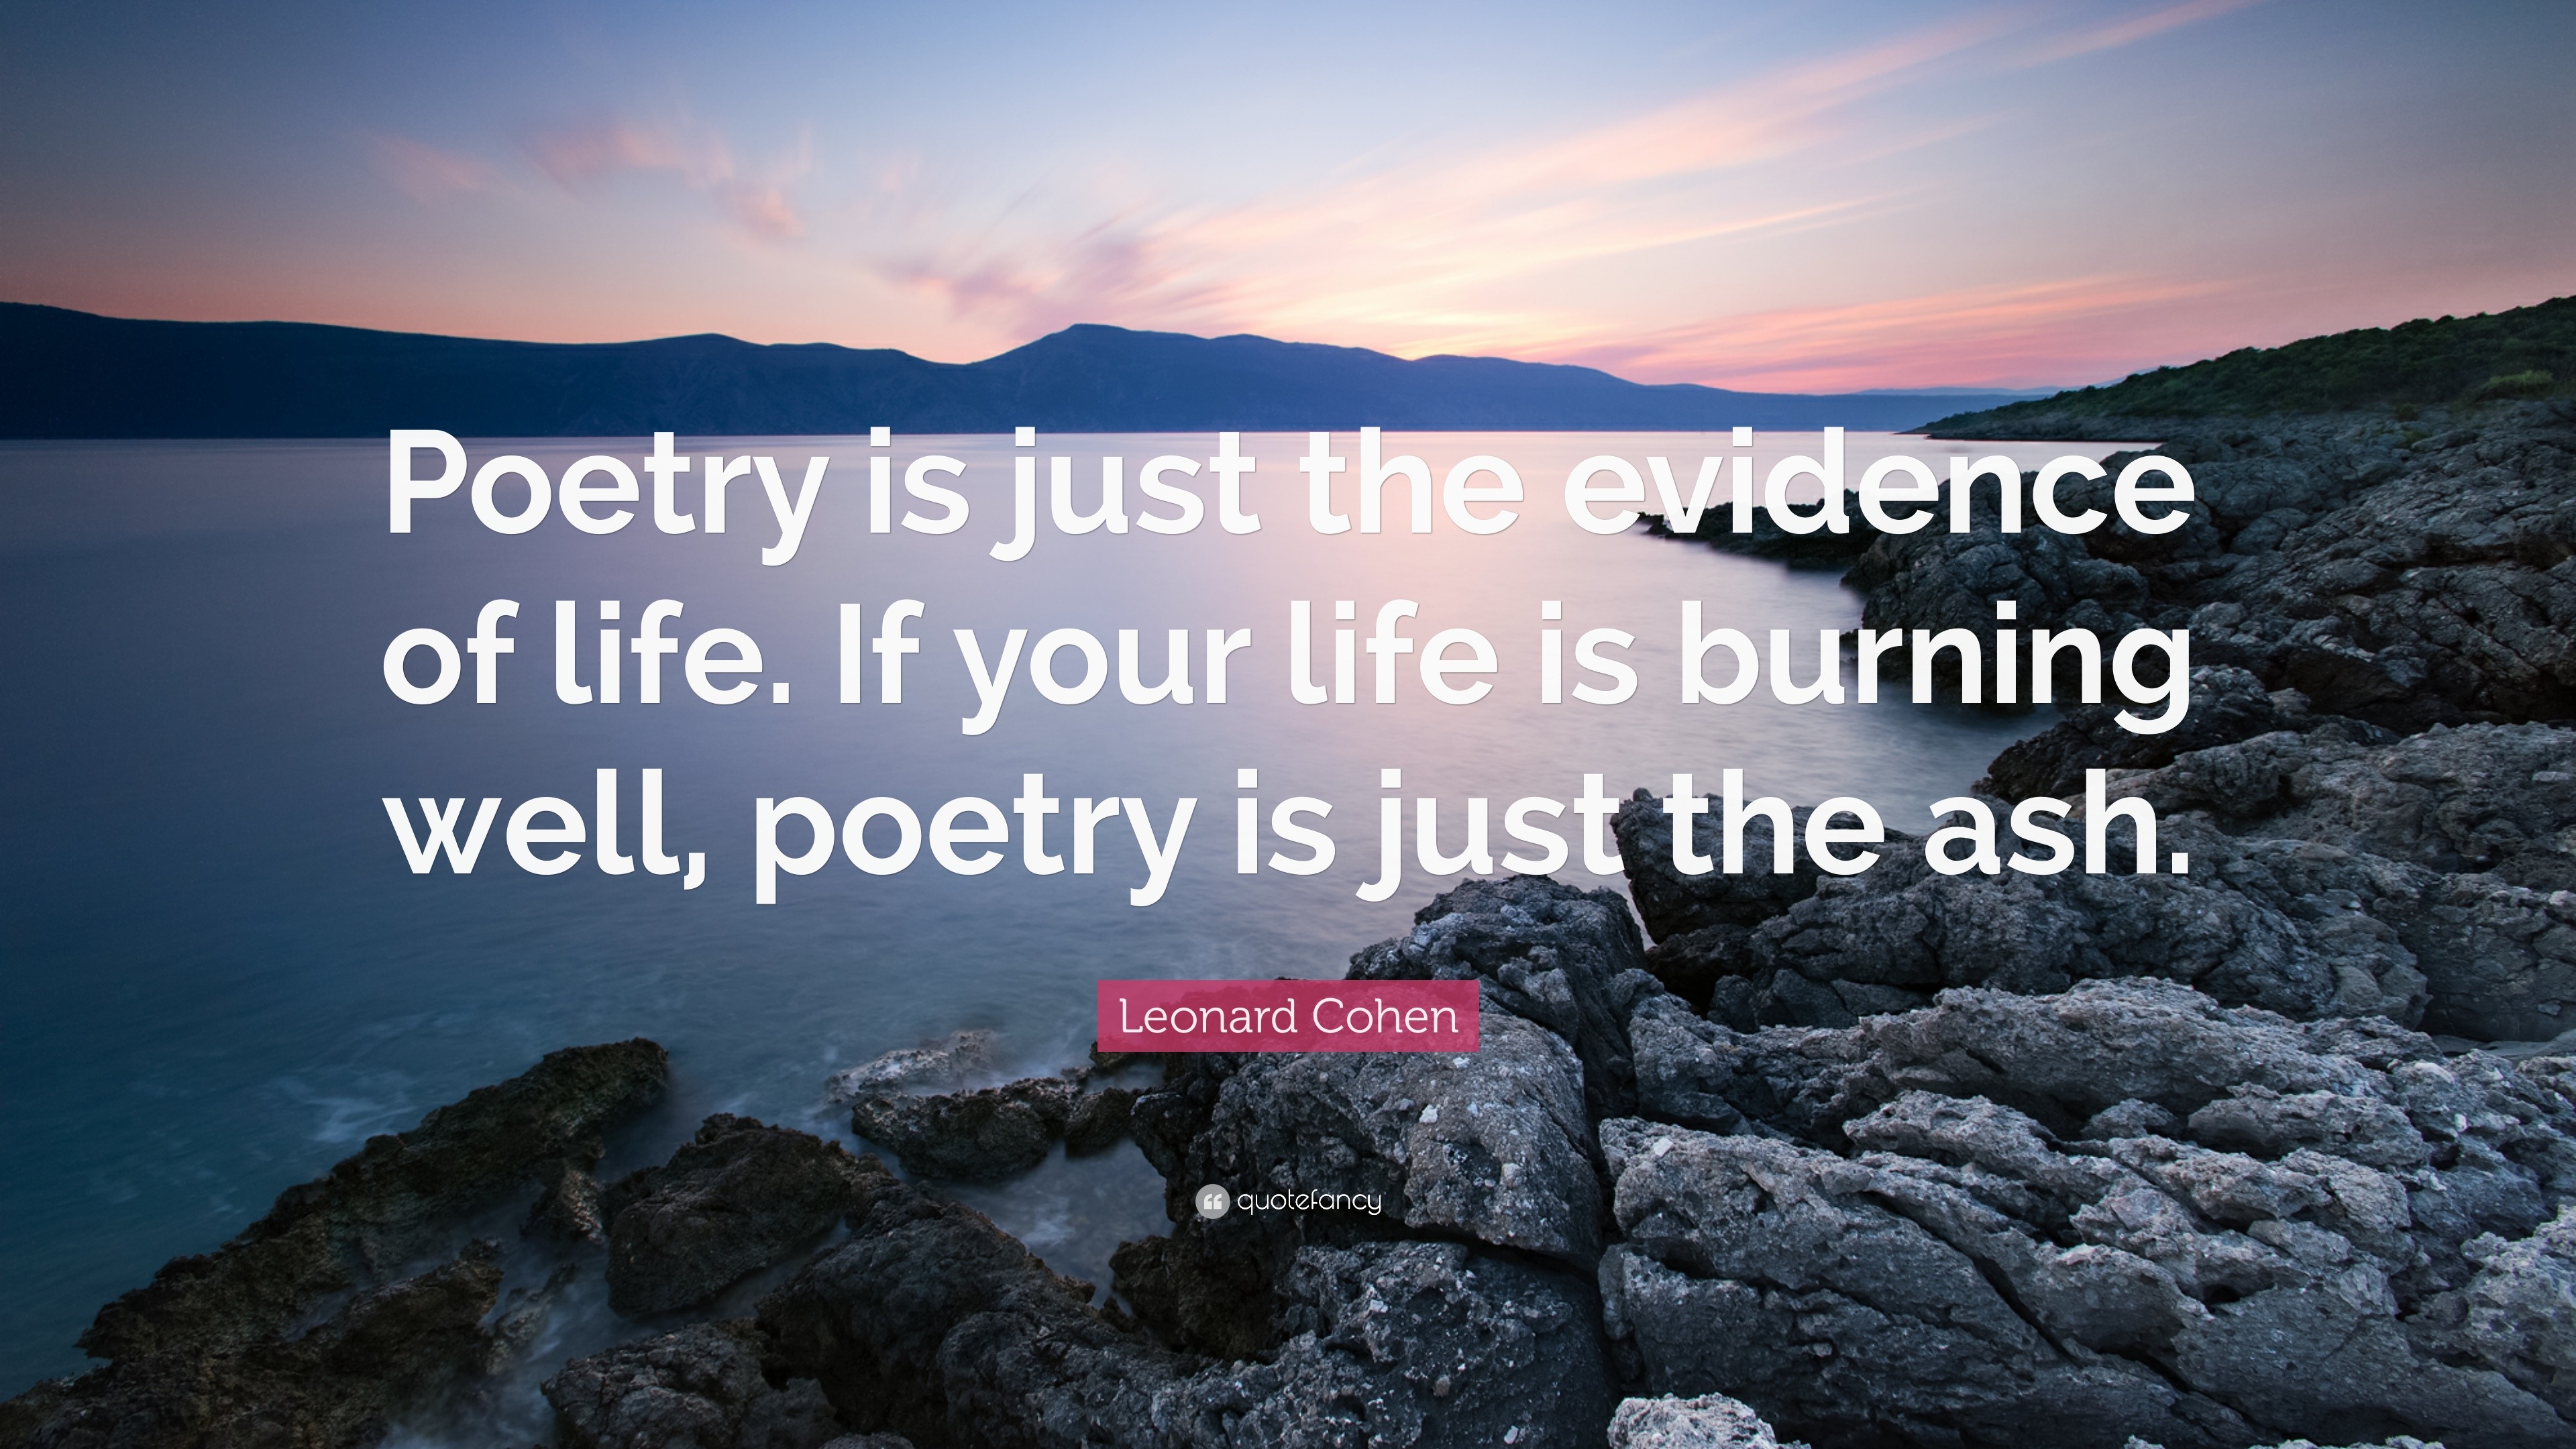 Leonard Cohen Quote: “Poetry is just the evidence of life. If your life